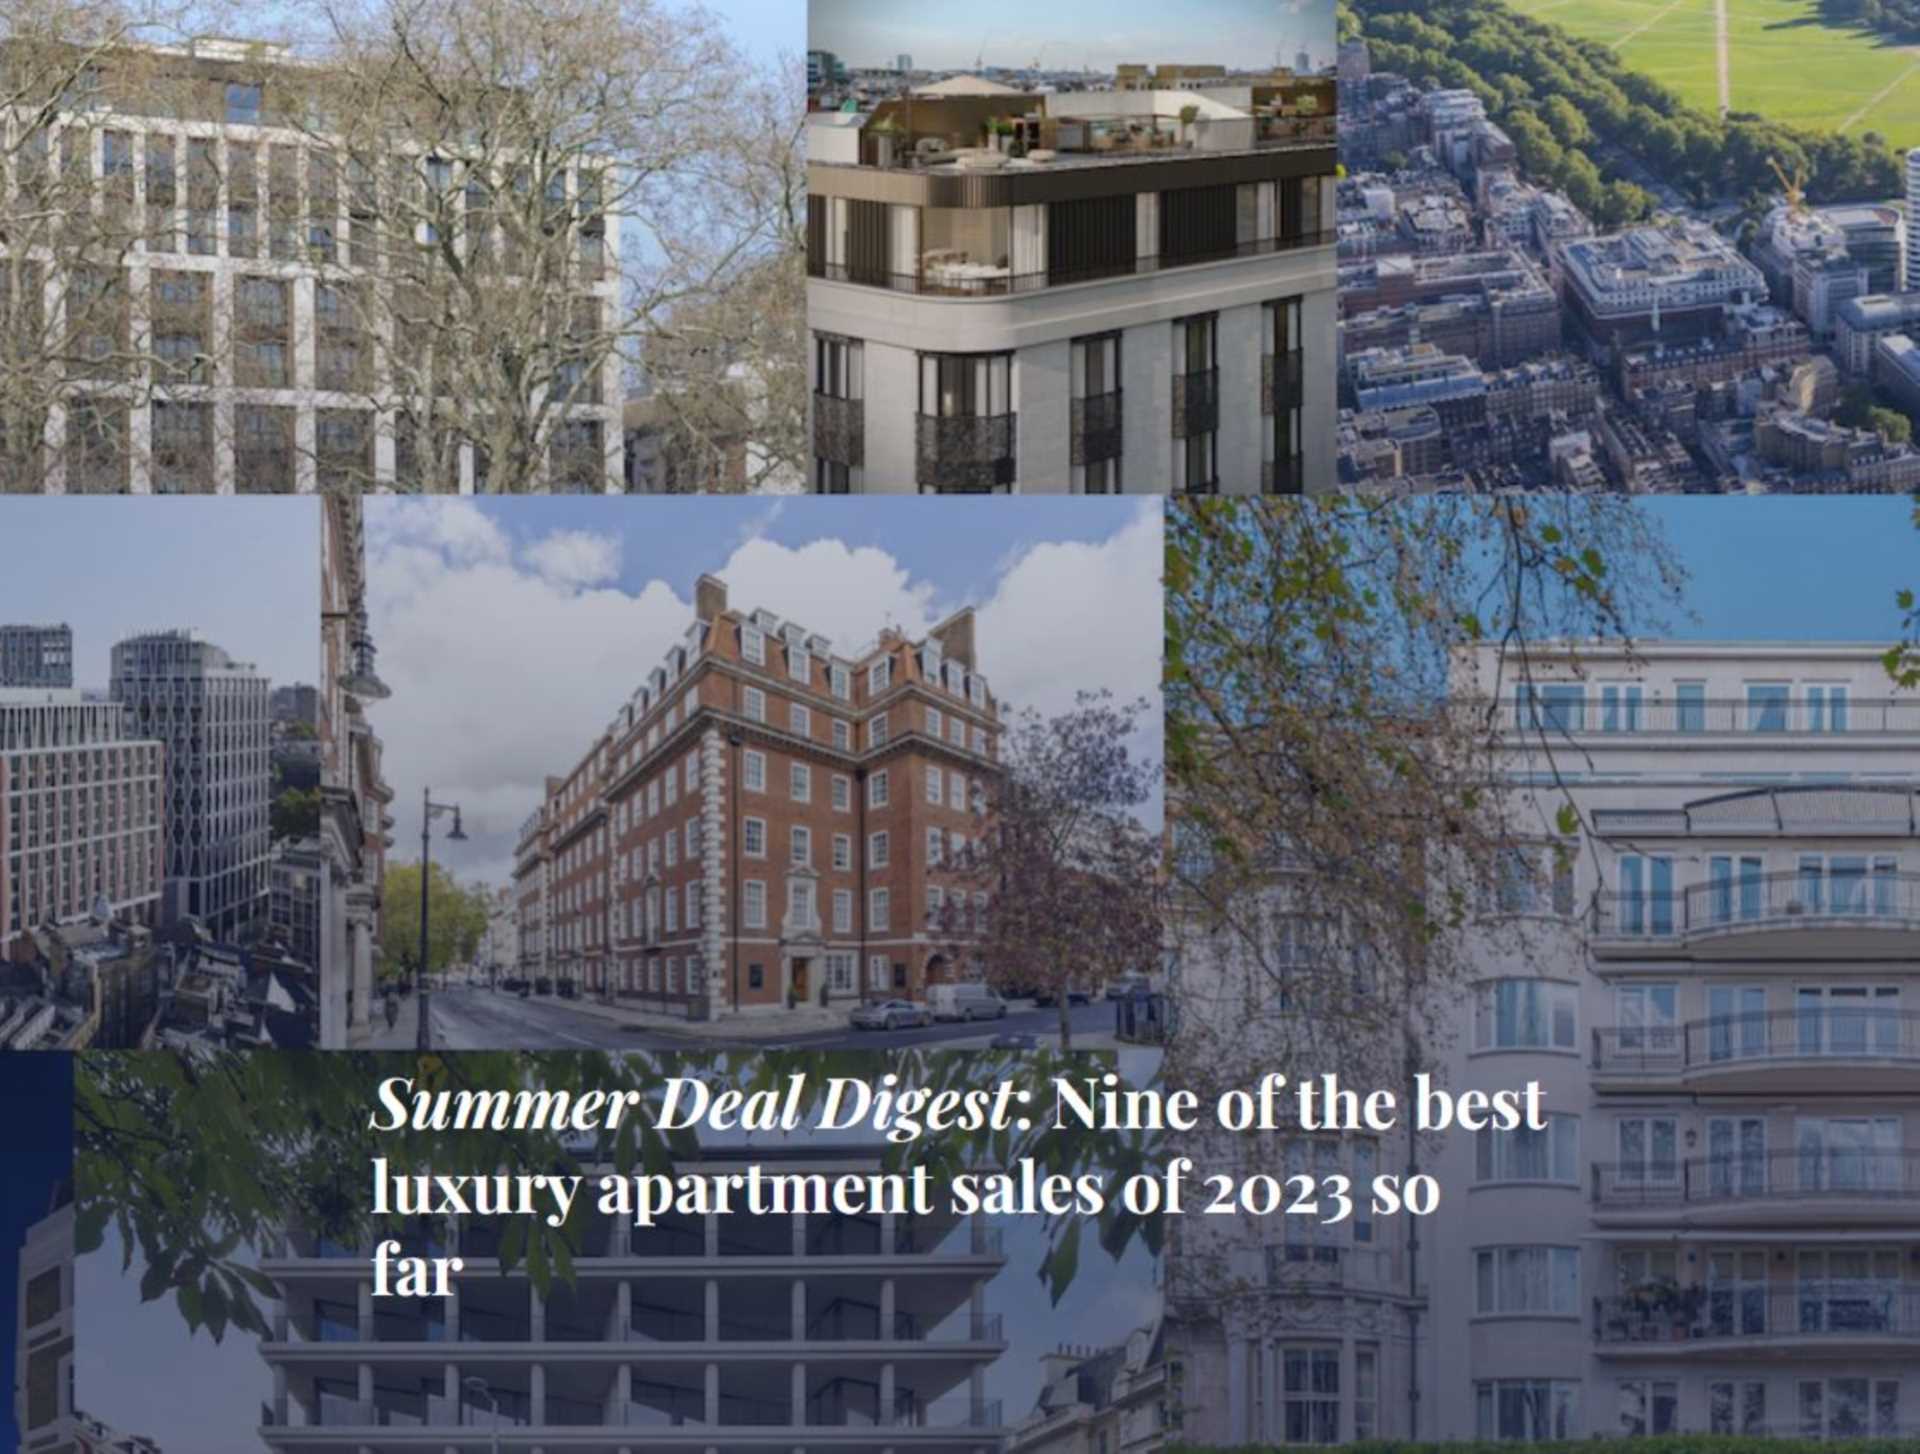 PrimeResi- Summer Deal Digest: Nine of the best luxury apartment sales of 2023 so far